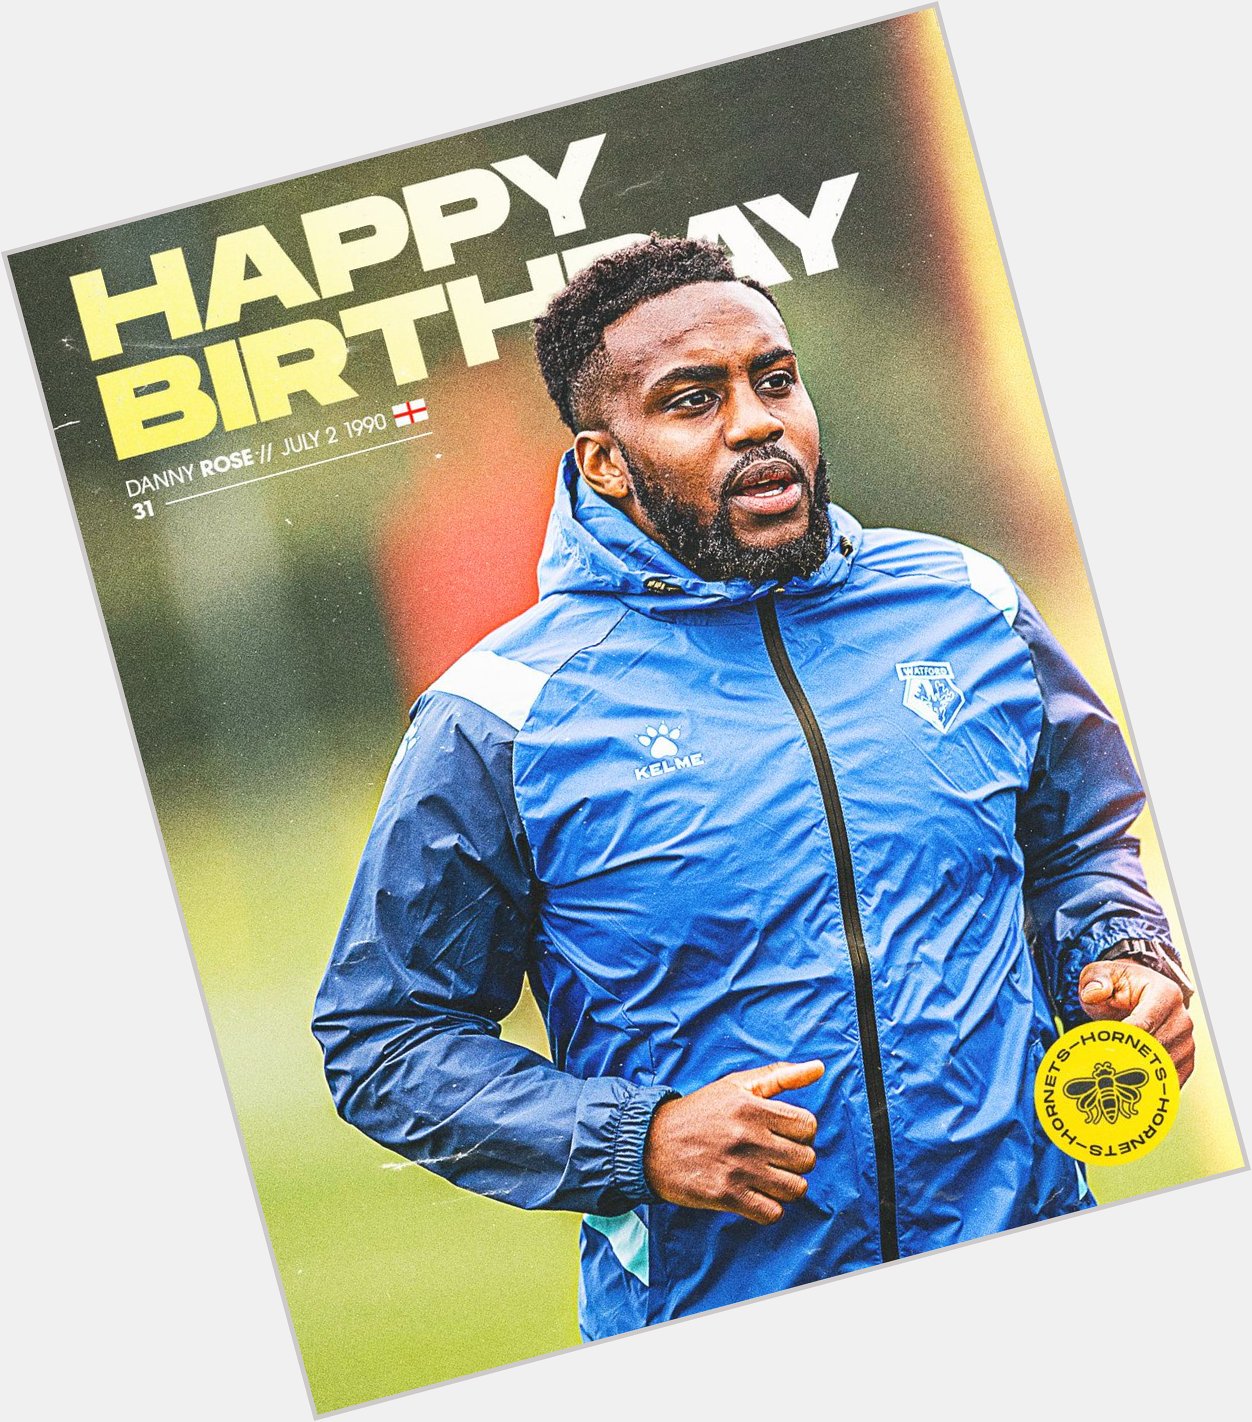 Happy Birthday, Danny Rose! Our new left-back turns 31 today 